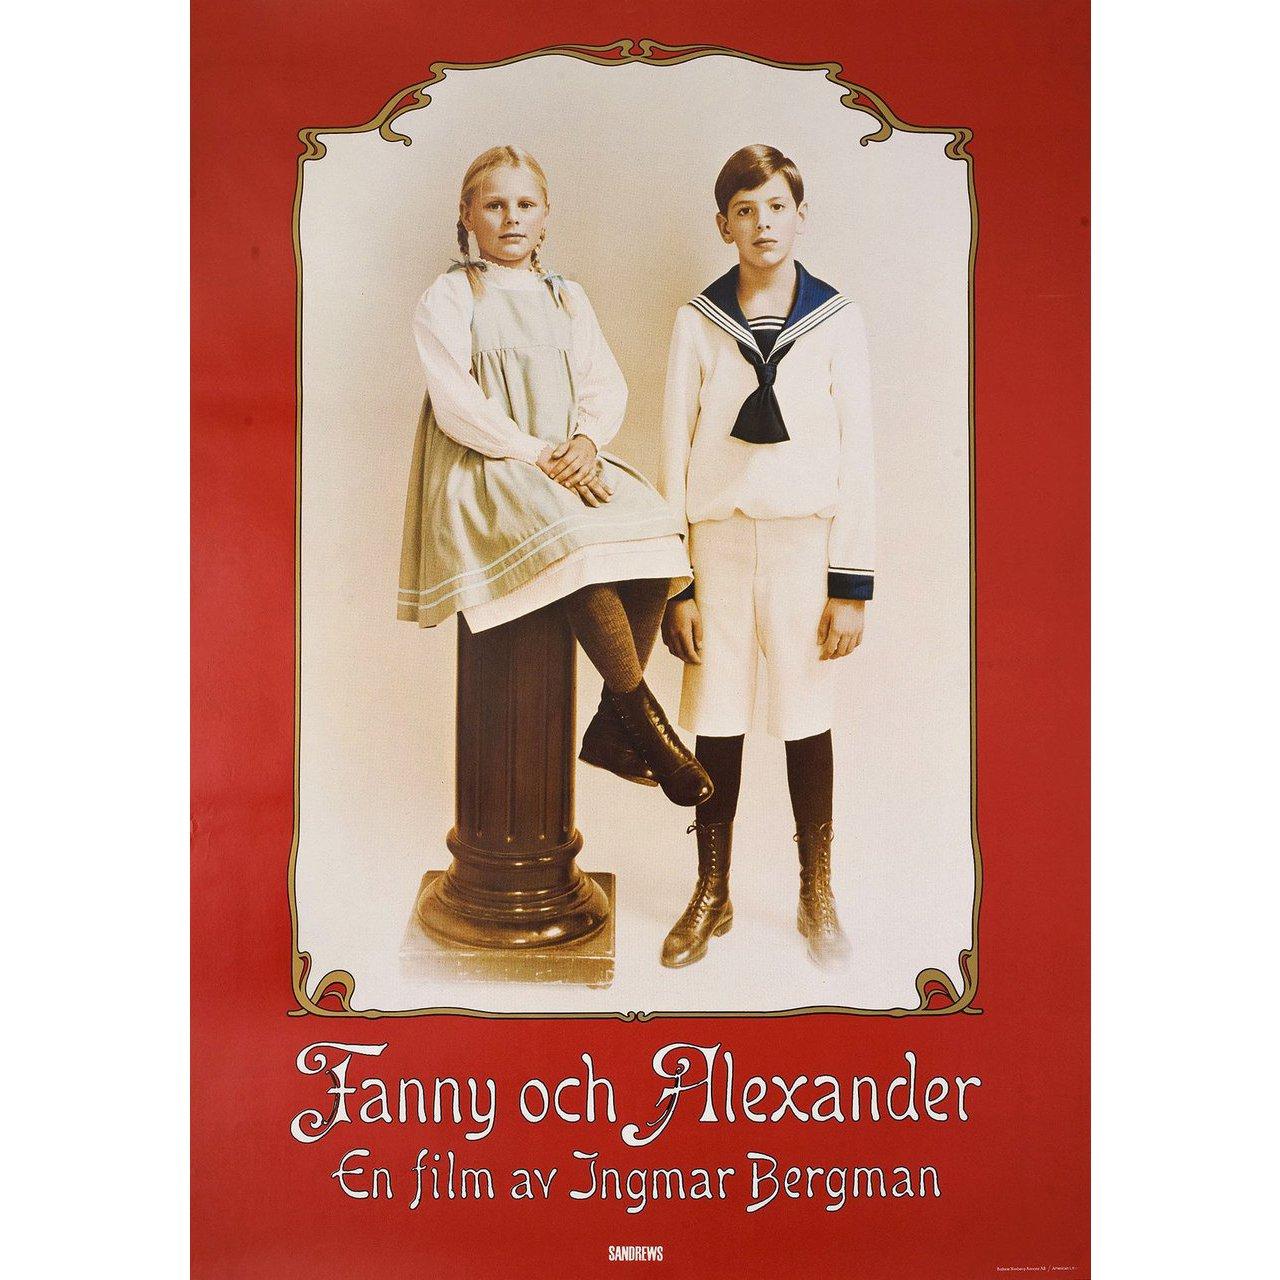 Original 1982 Swedish B1 poster for the film ‘Fanny and Alexander’ (Fanny och Alexander) directed by Ingmar Bergman with Kristina Adolphson / Borje Ahlstedt / Pernilla Allwin / Kristian Almgren. Fine condition, rolled. Please note: the size is